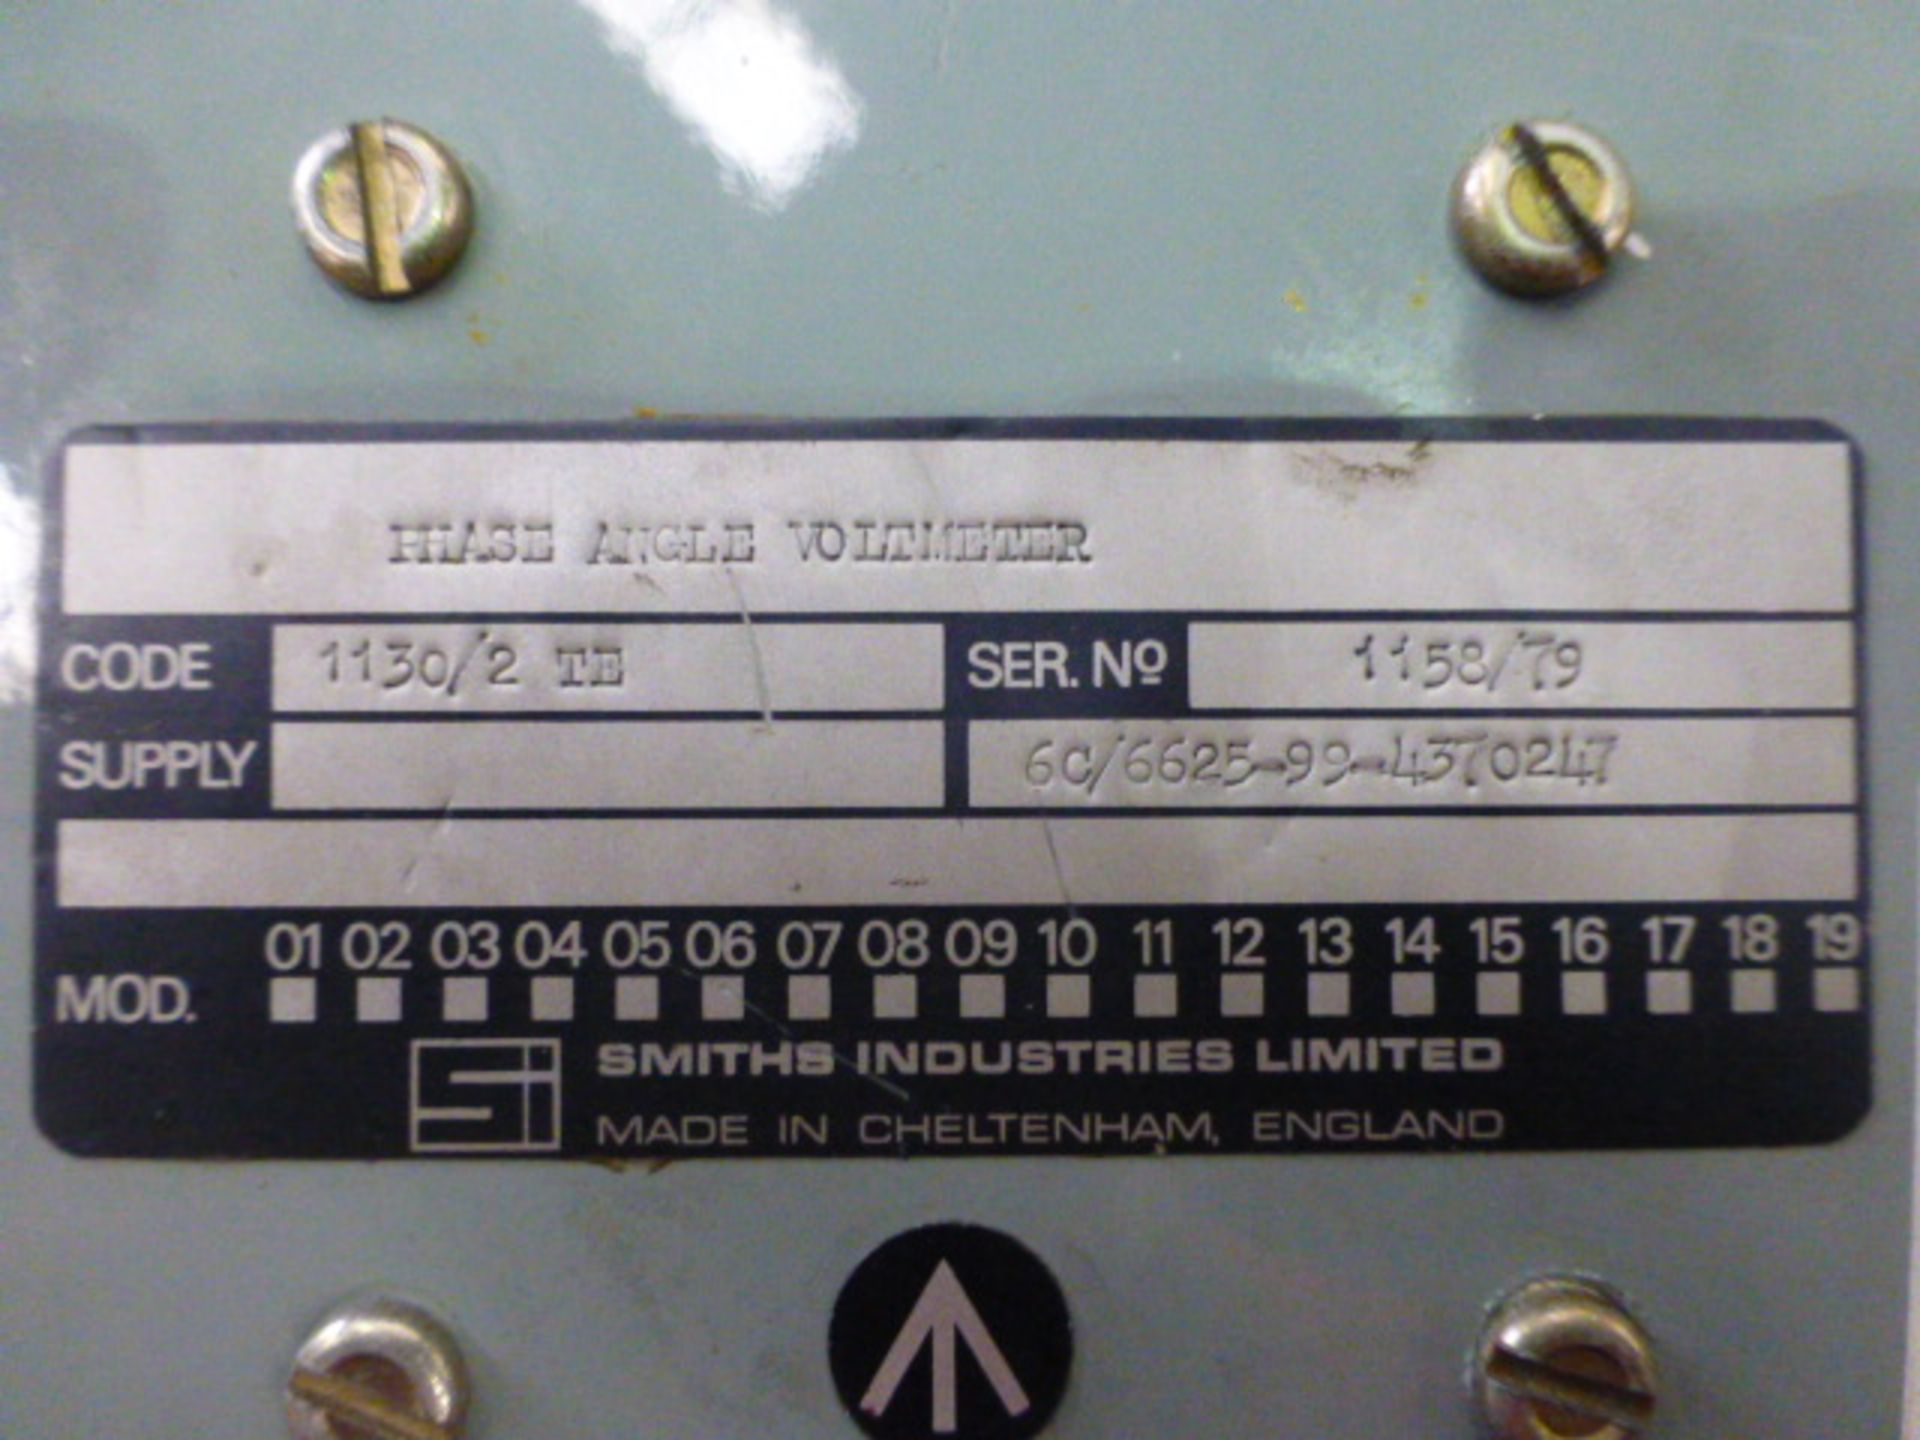 Smiths Industries Phase Angle Volt Meter - Image 5 of 6